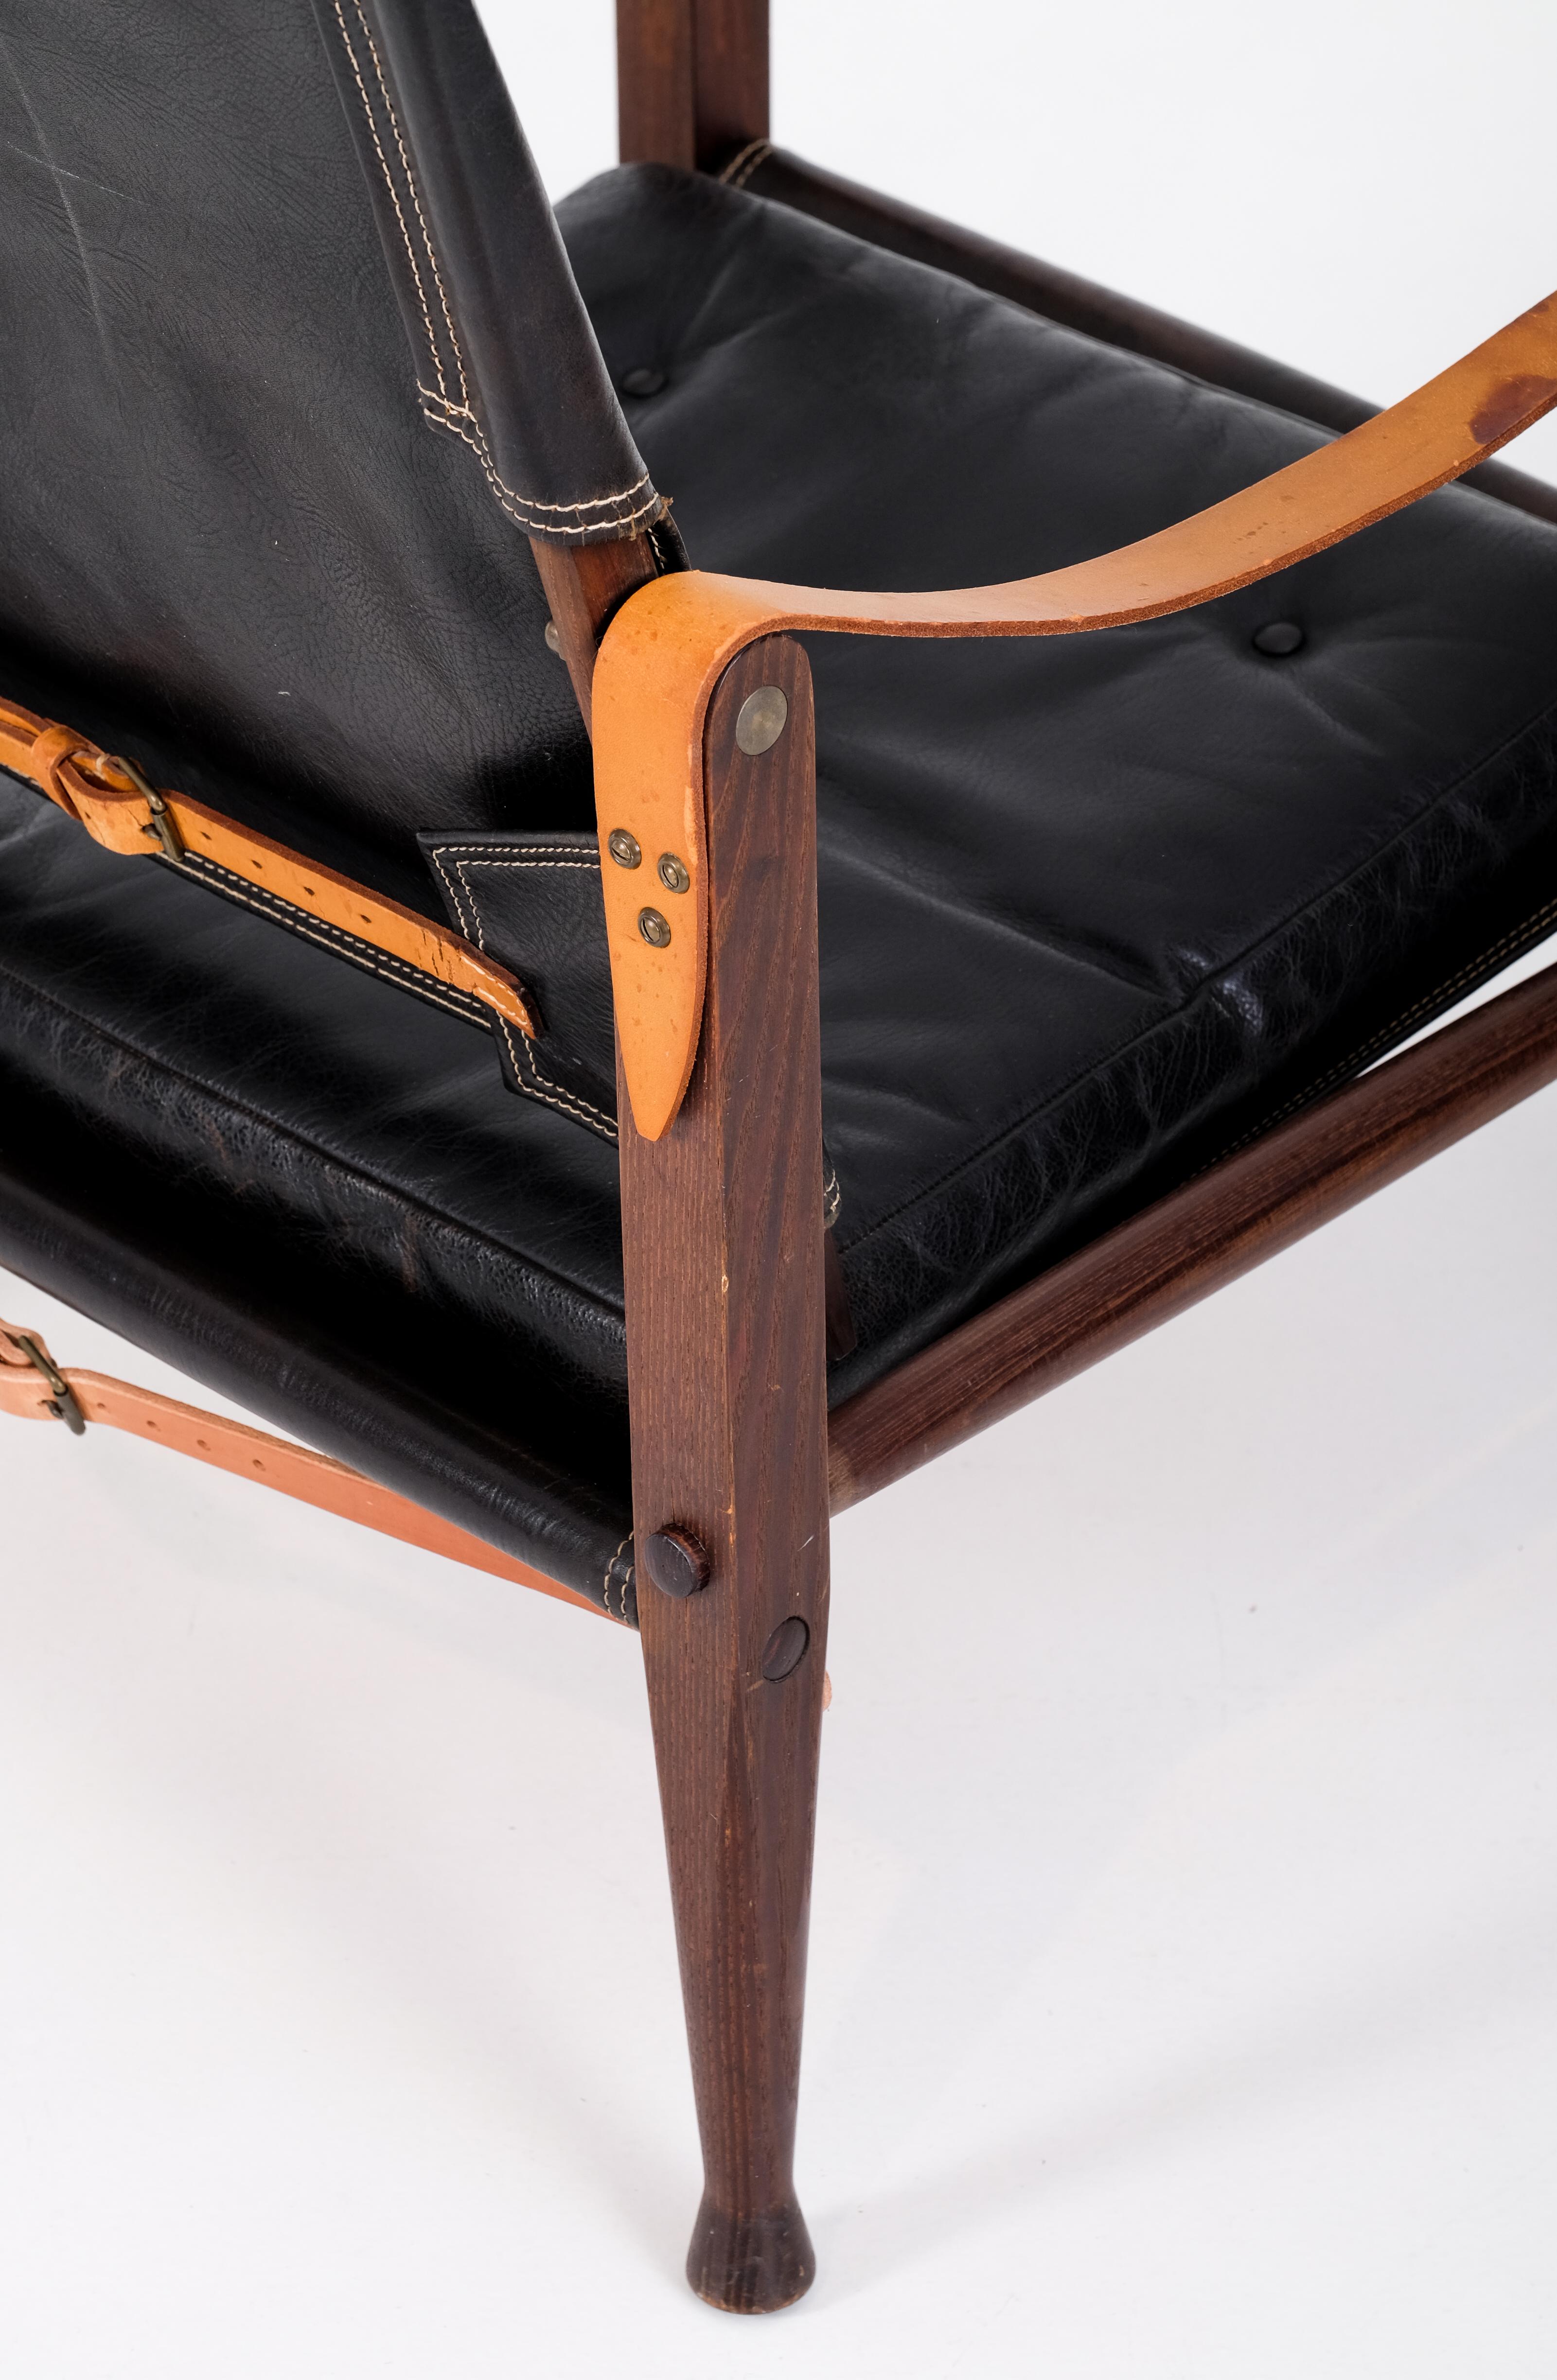 Kaare Klint Black Leather Safari Chair, 1960s In Good Condition For Sale In Stockholm, SE